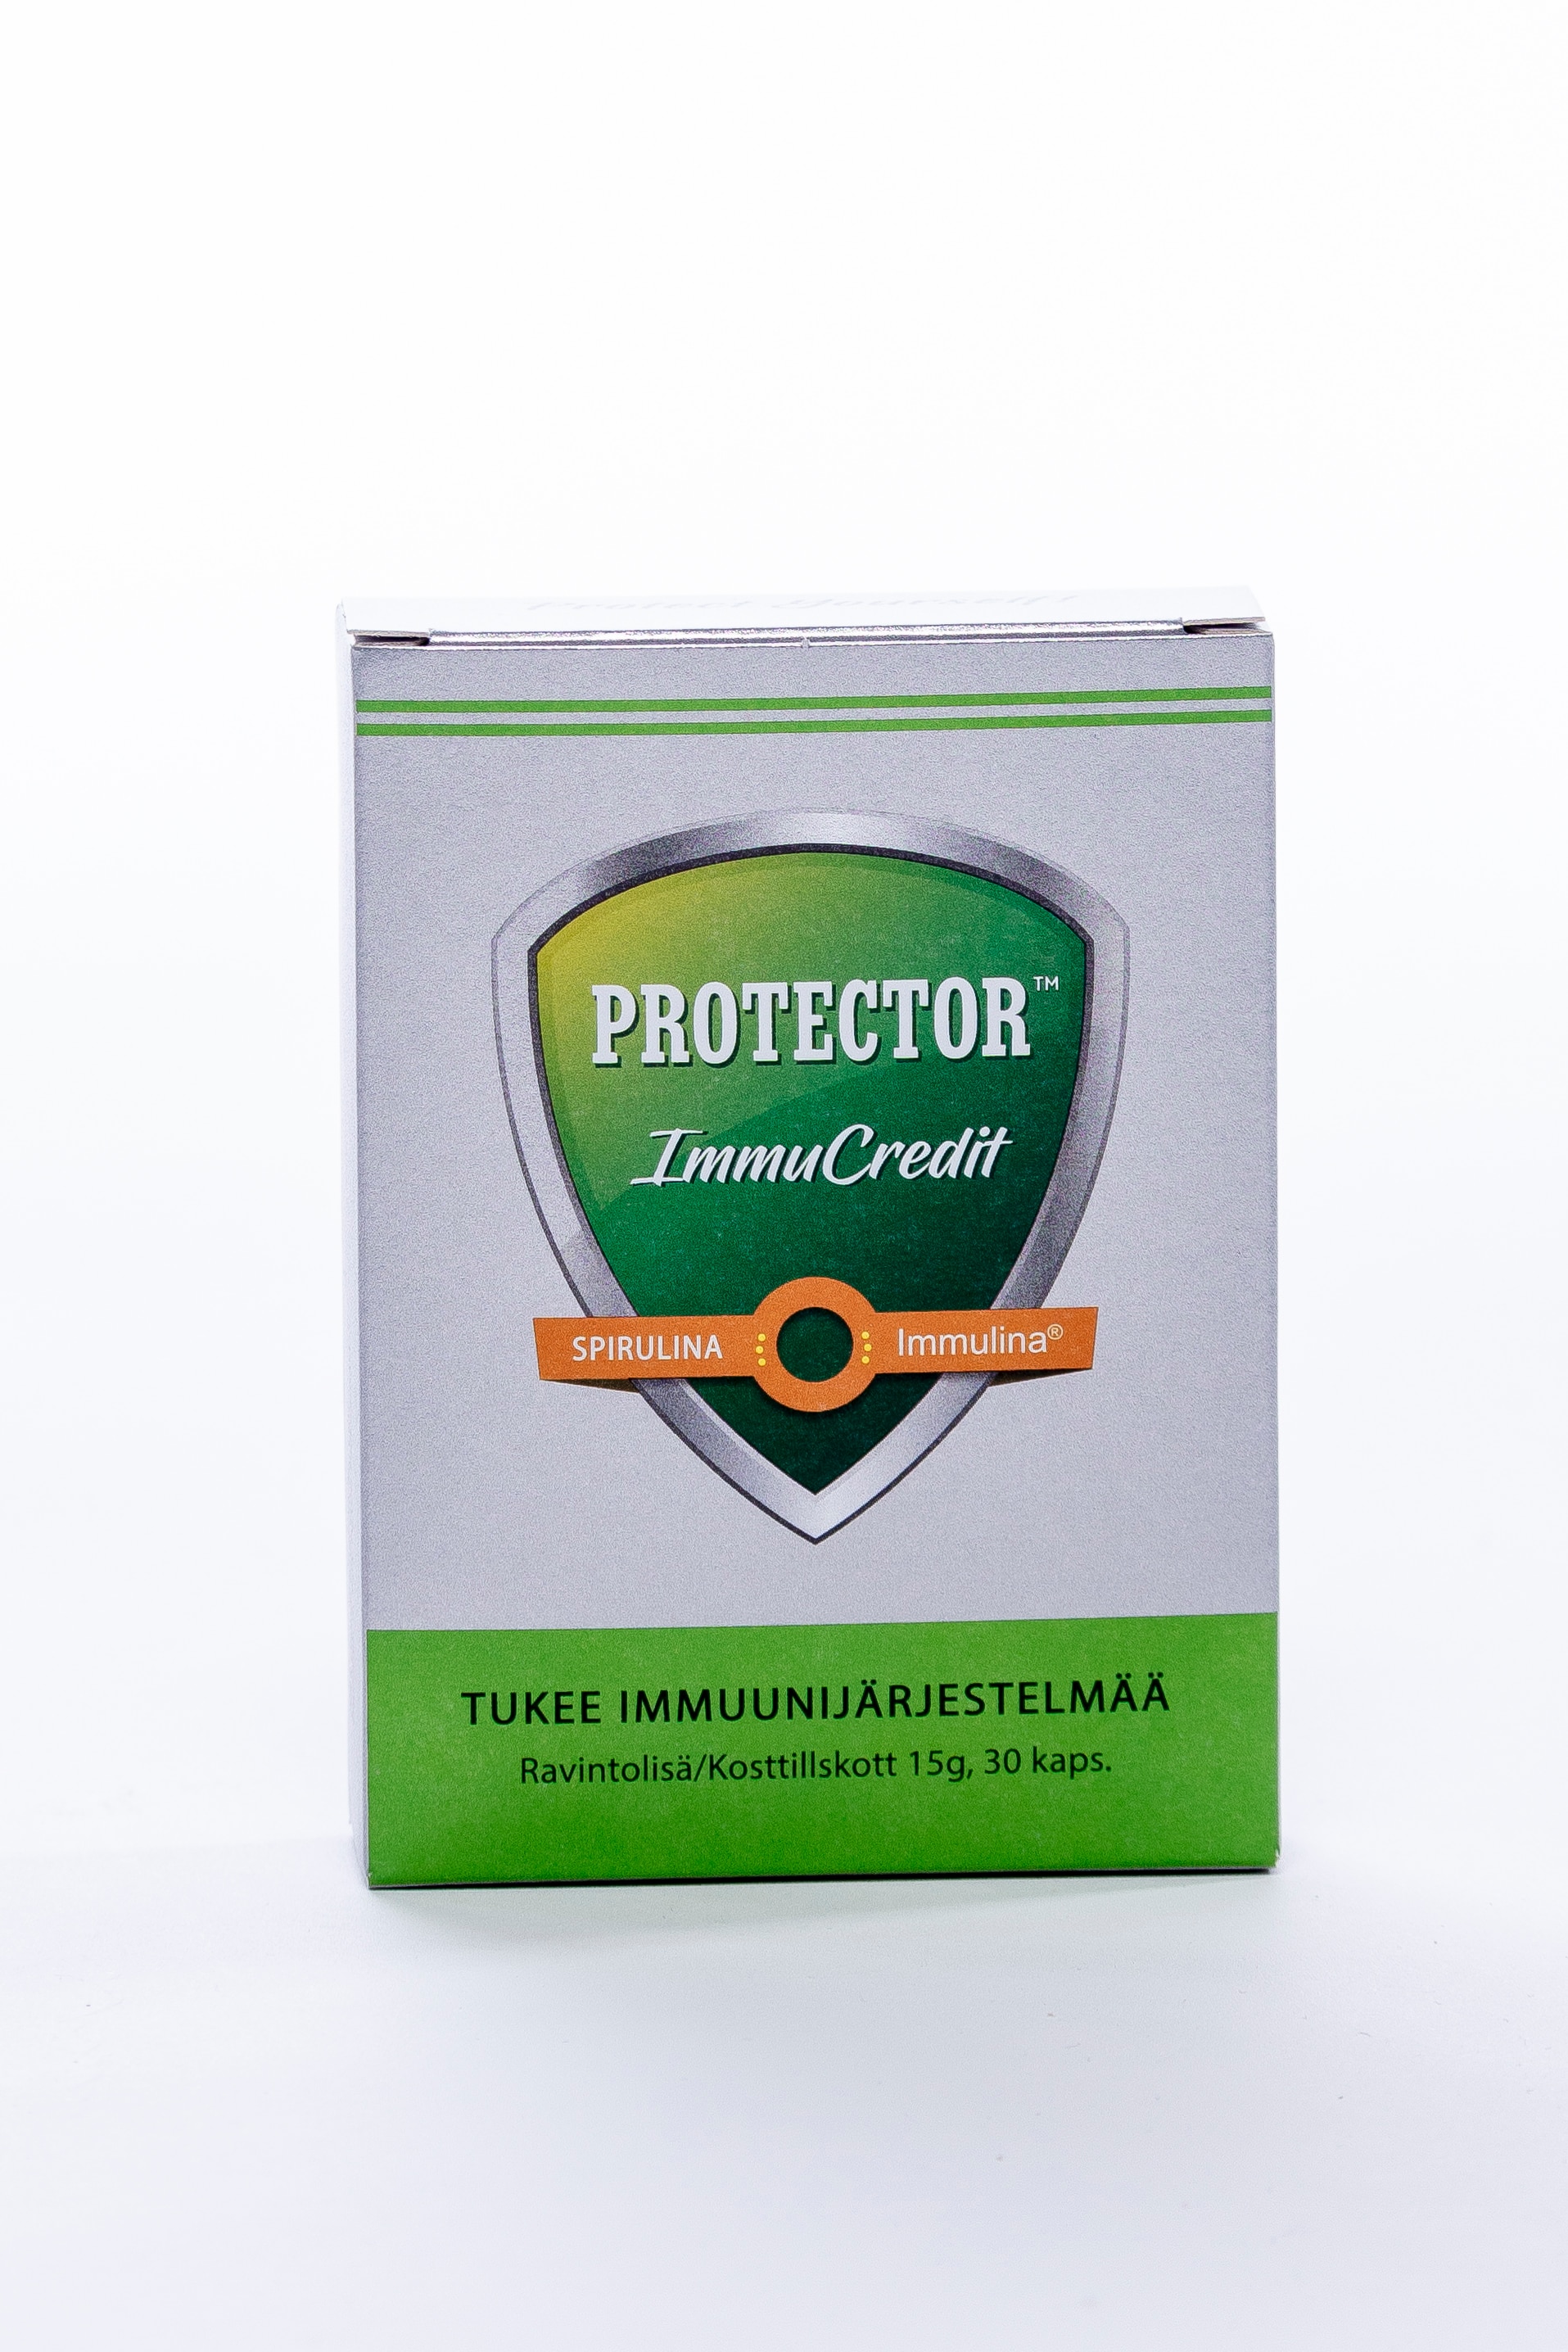 Protector Immucredit